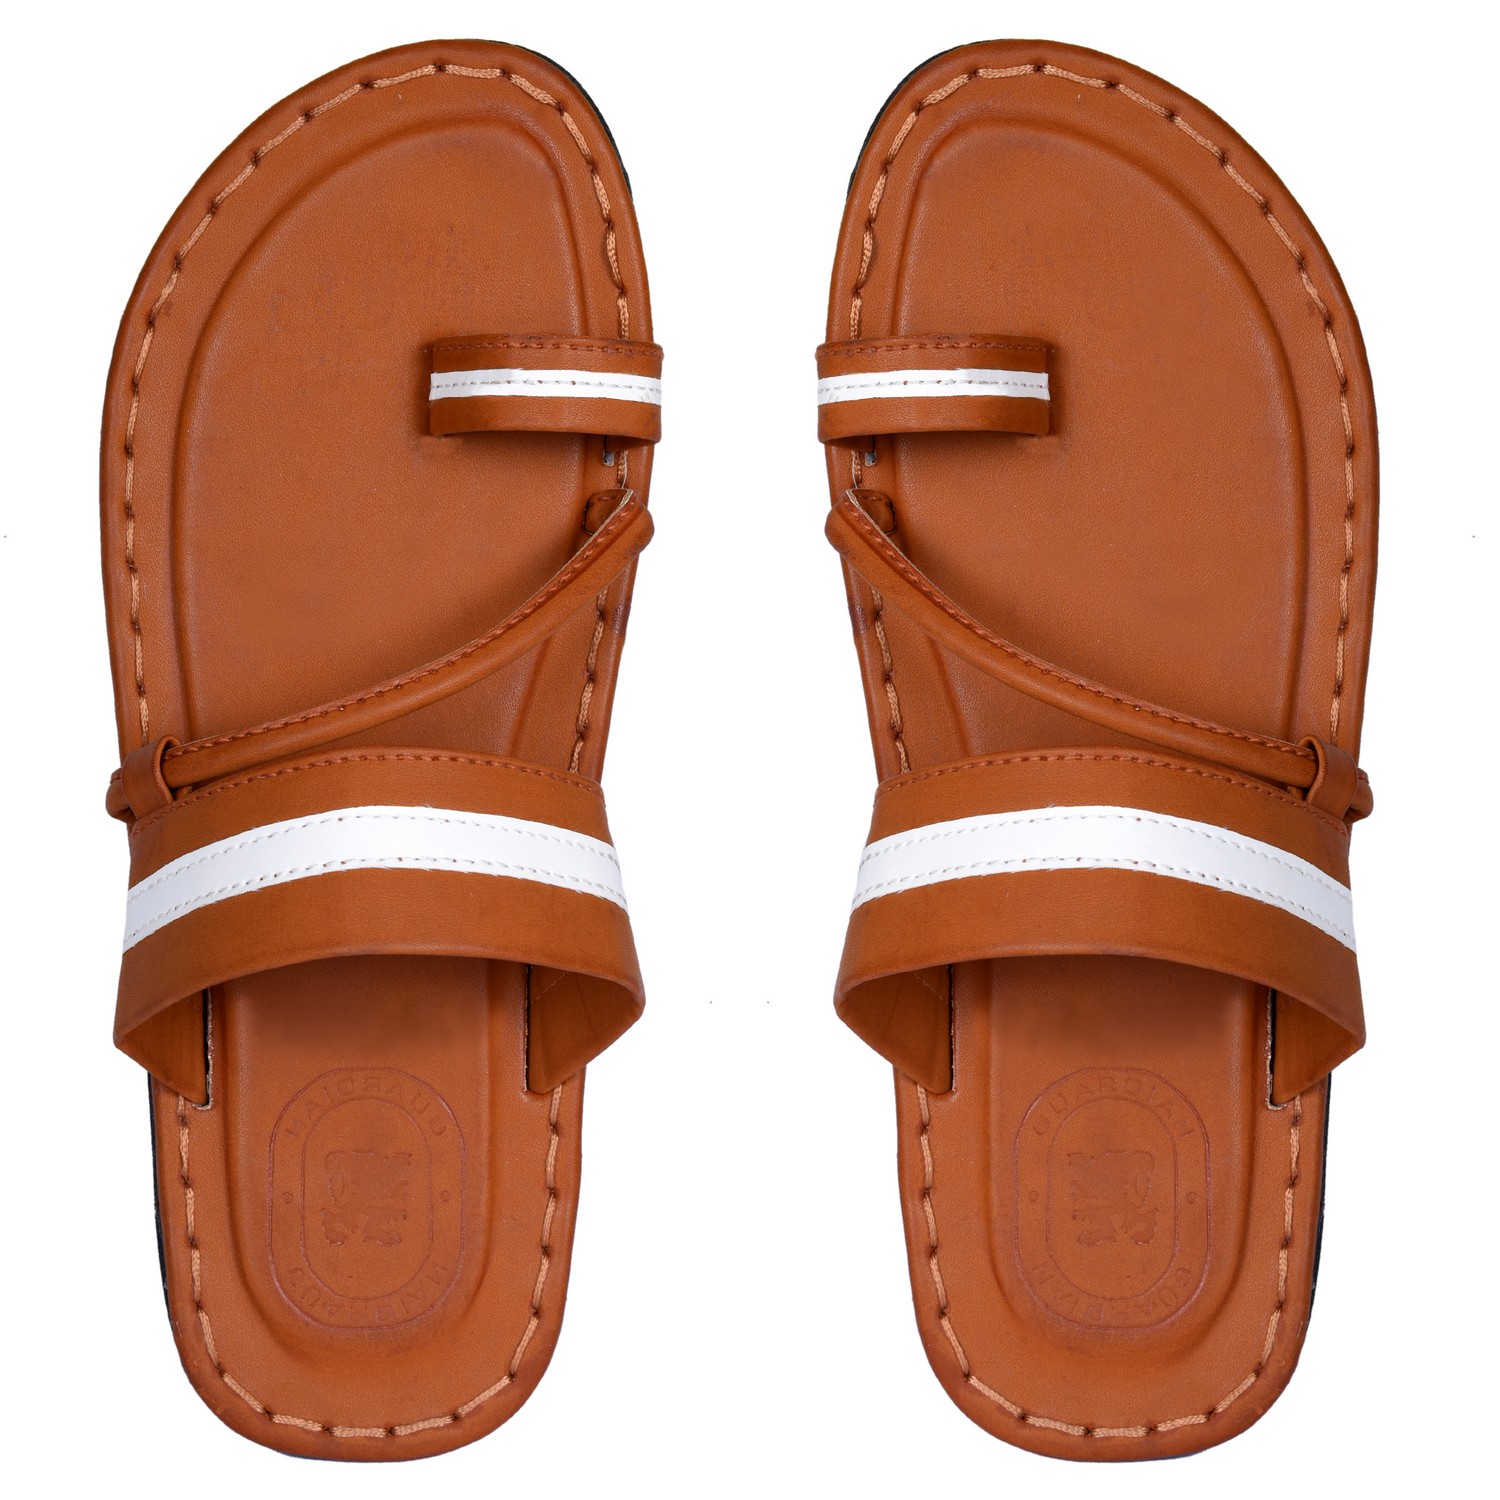 Buy slipper leather look for Mens stylish Online @ ₹375 from ShopClues